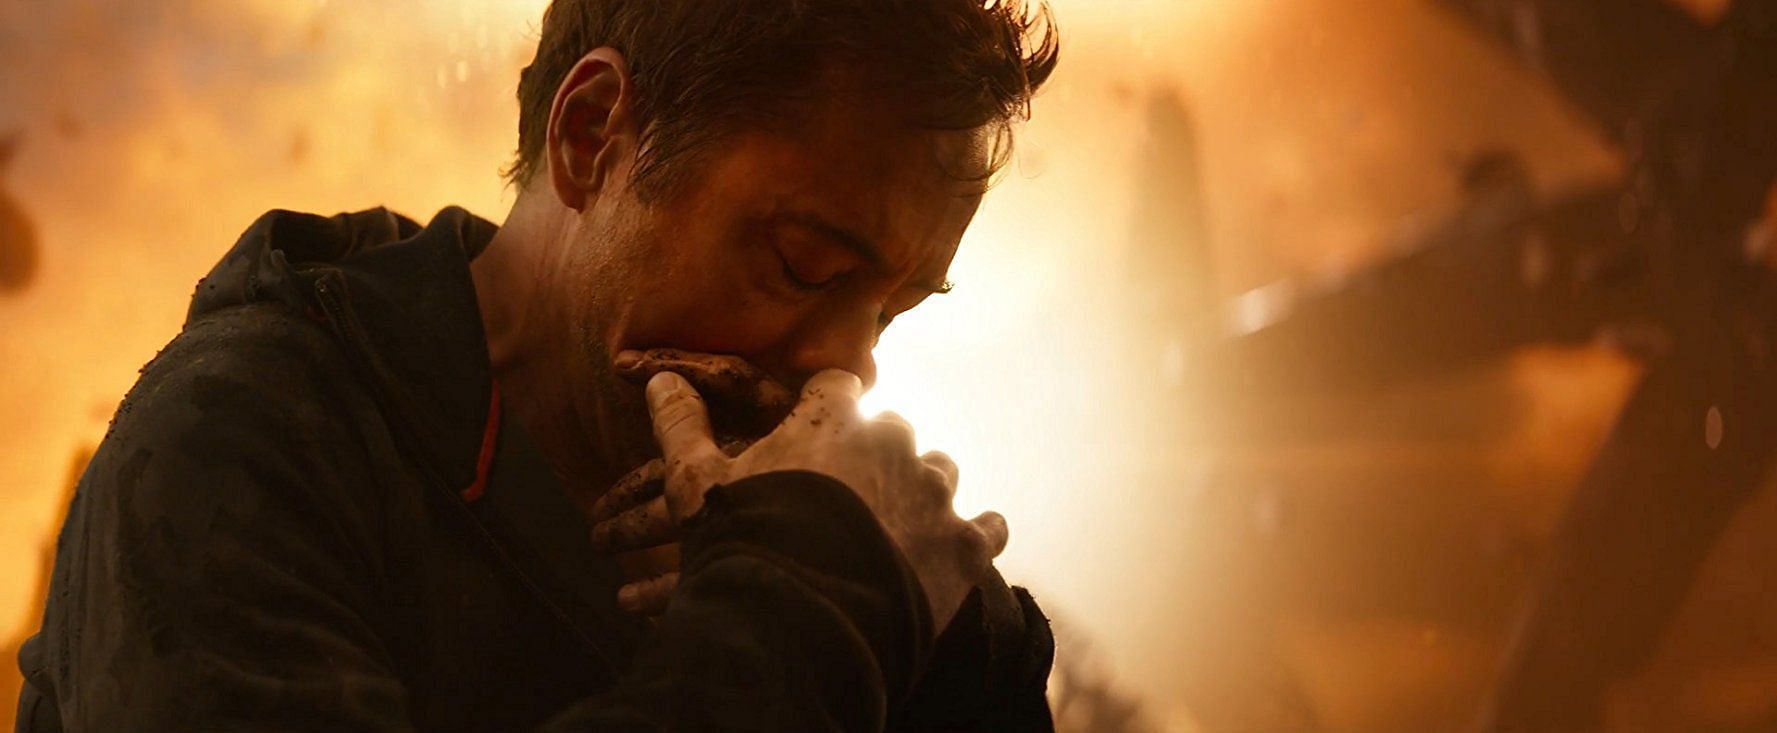 Tears were shed with every emotional scene in Endgame and Infinity War. Which movie tugs at your heartstrings more? (Image via Marvel Studios)